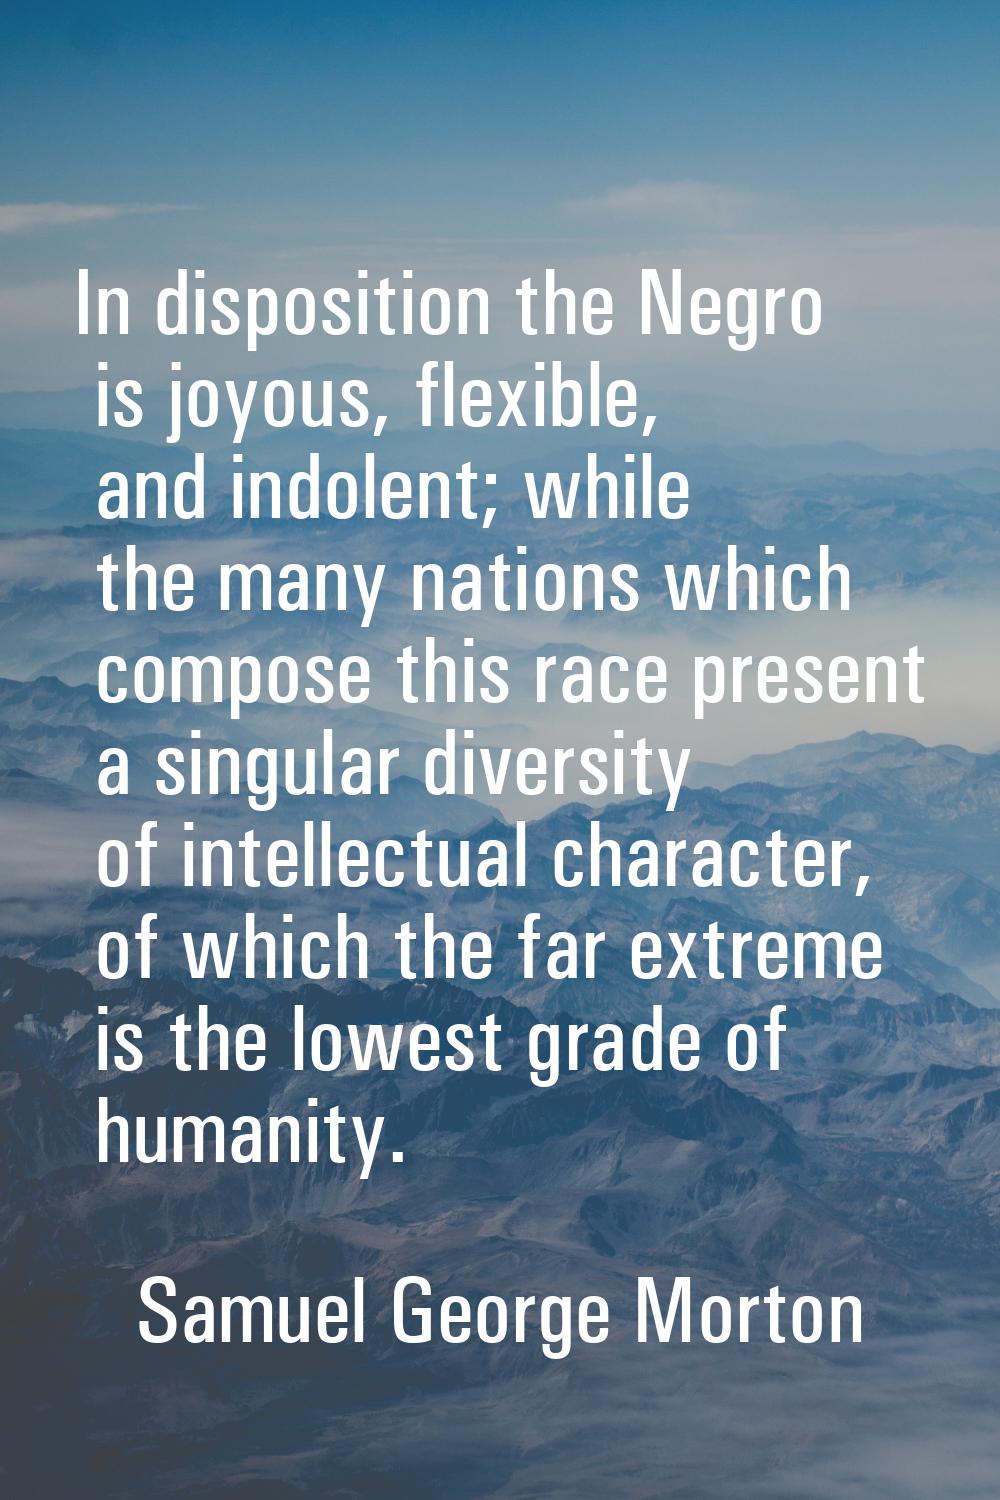 In disposition the Negro is joyous, flexible, and indolent; while the many nations which compose th